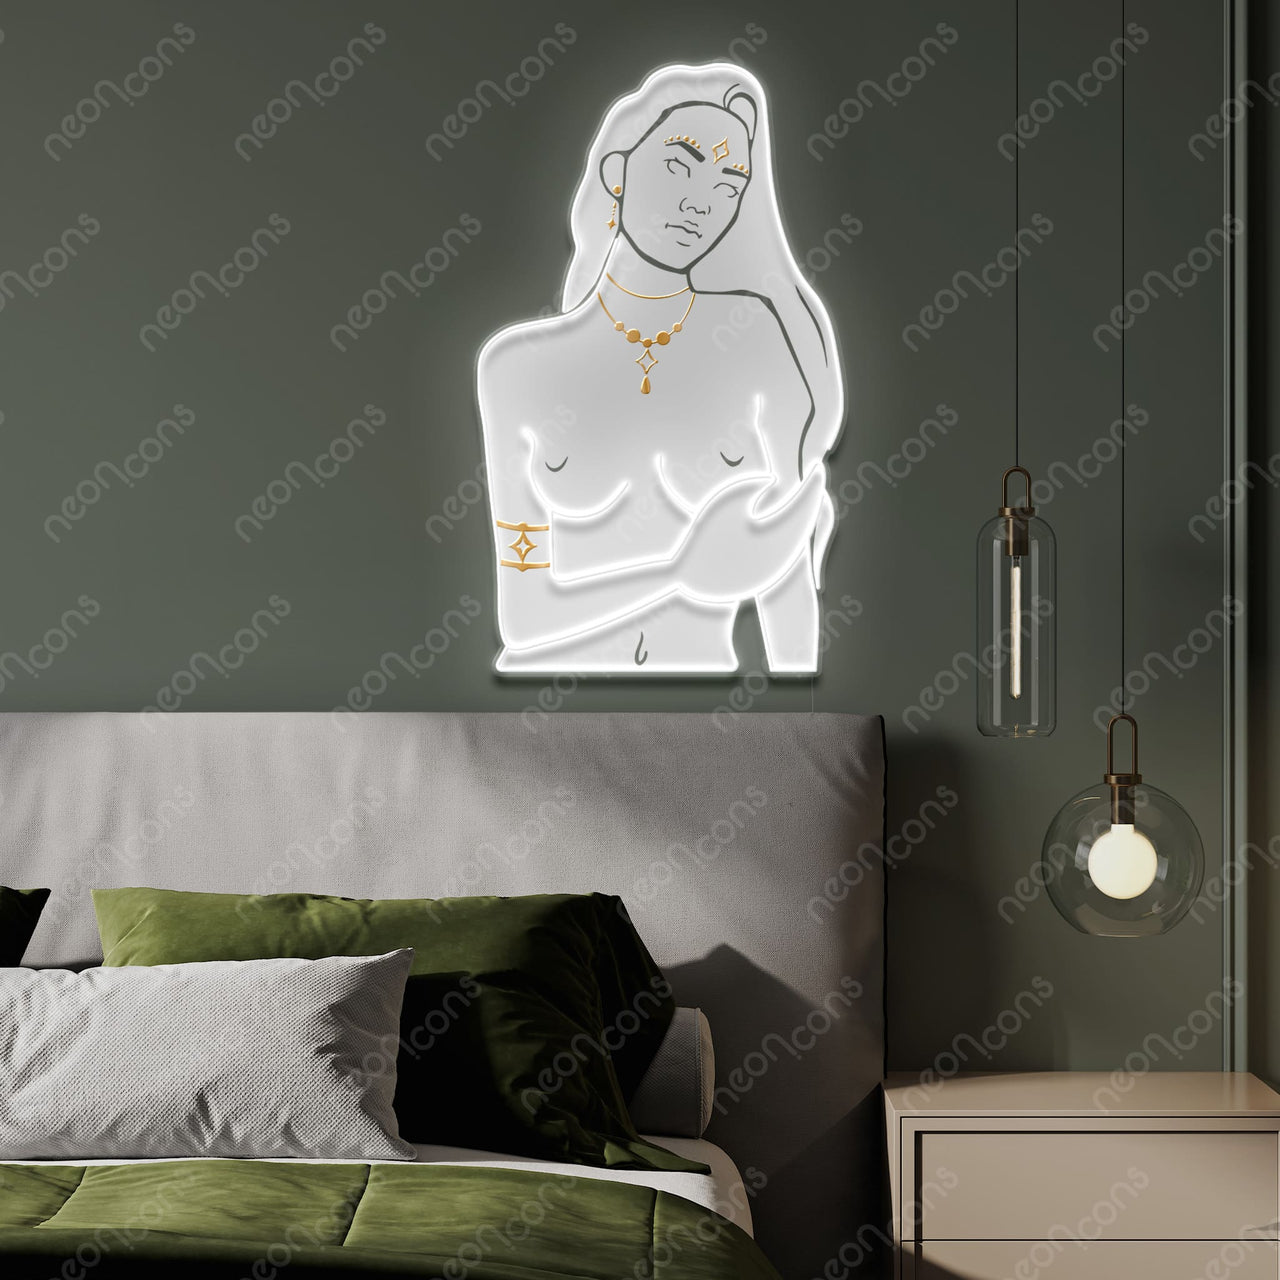 "Cancer Goddess" LED Neon x Print x Reflective Acrylic by Neon Icons